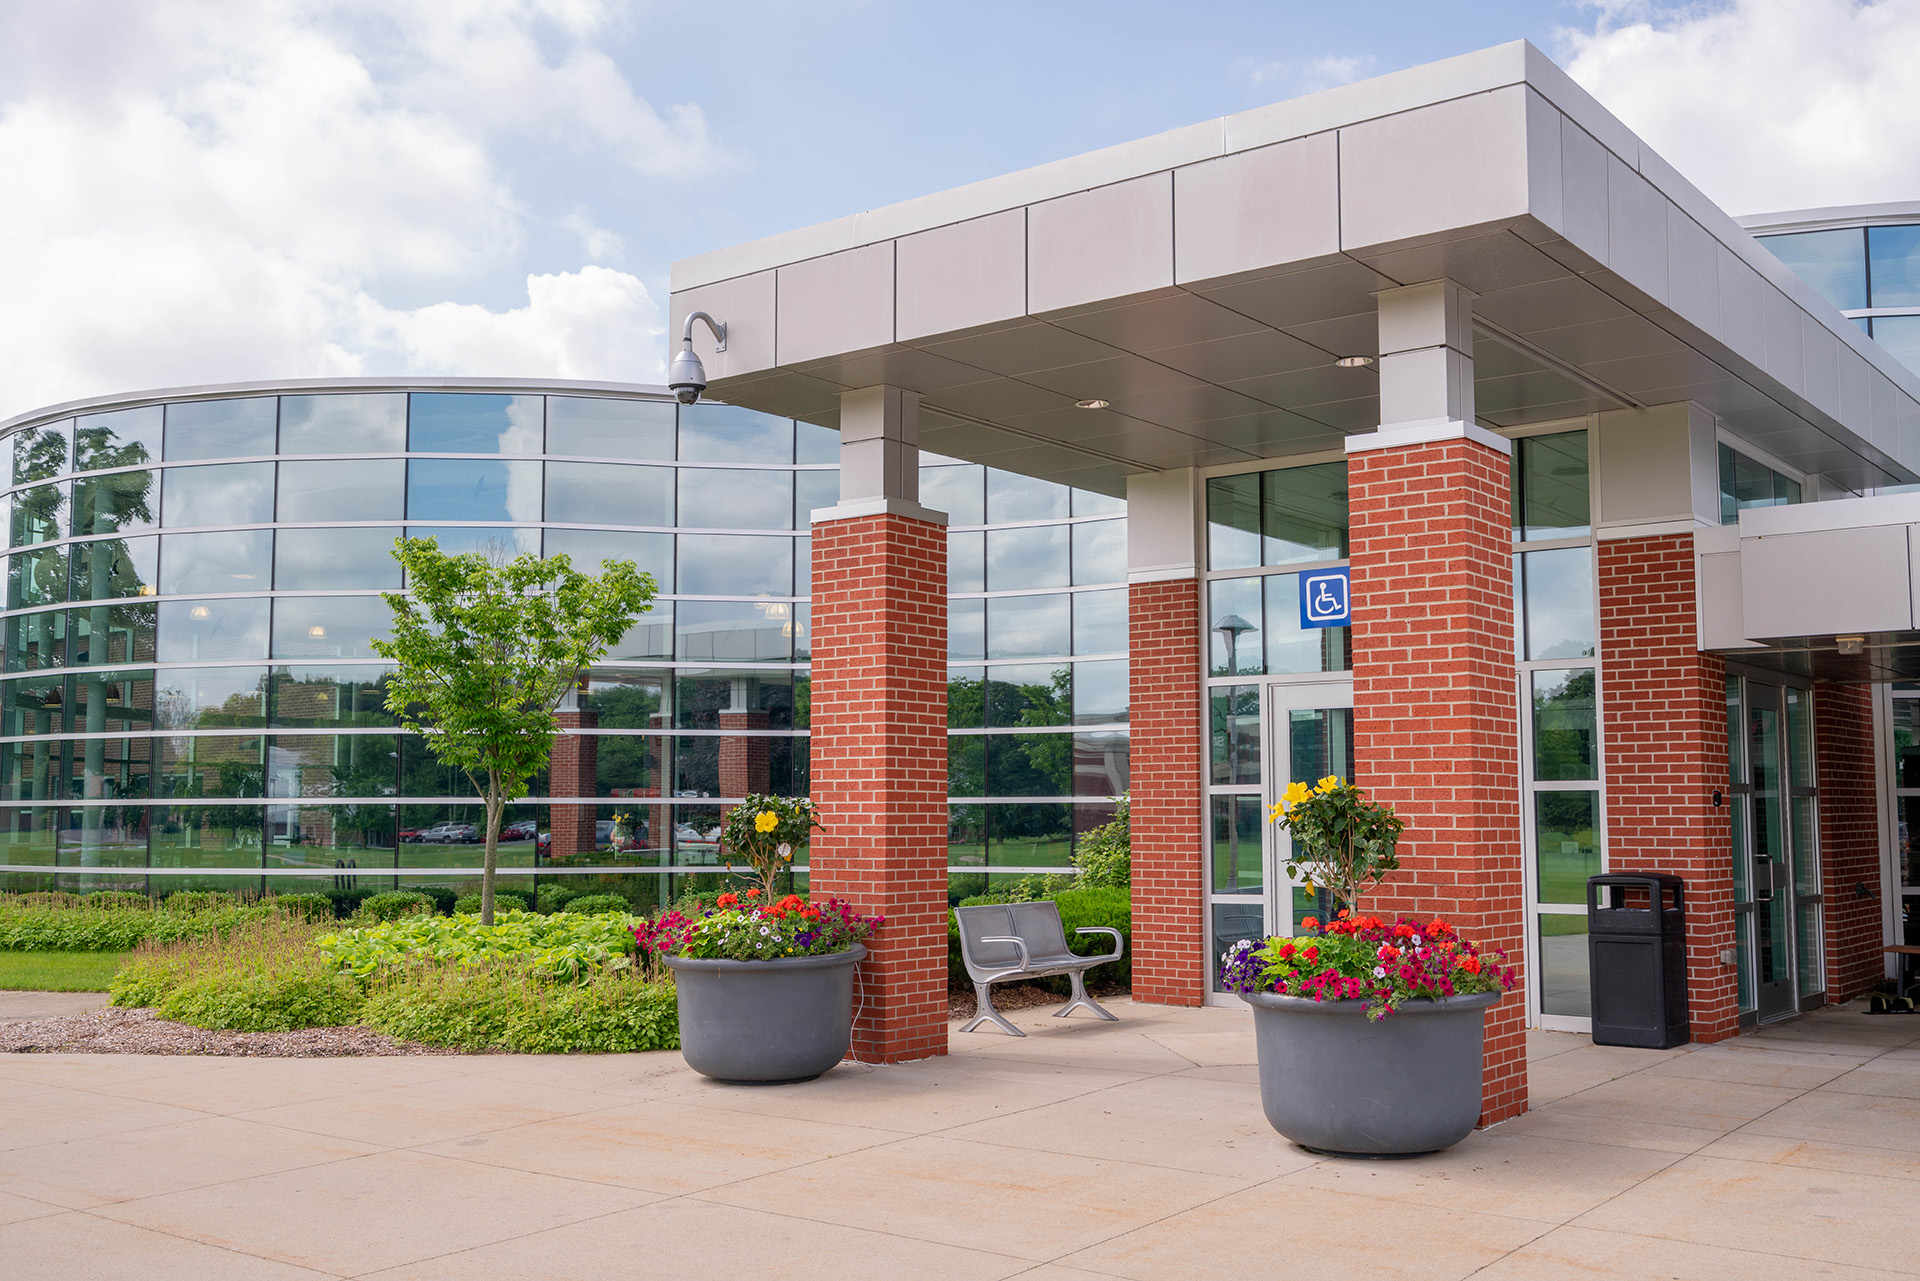 Student Activity Center is the hub of student life on the Dowagiac Campus